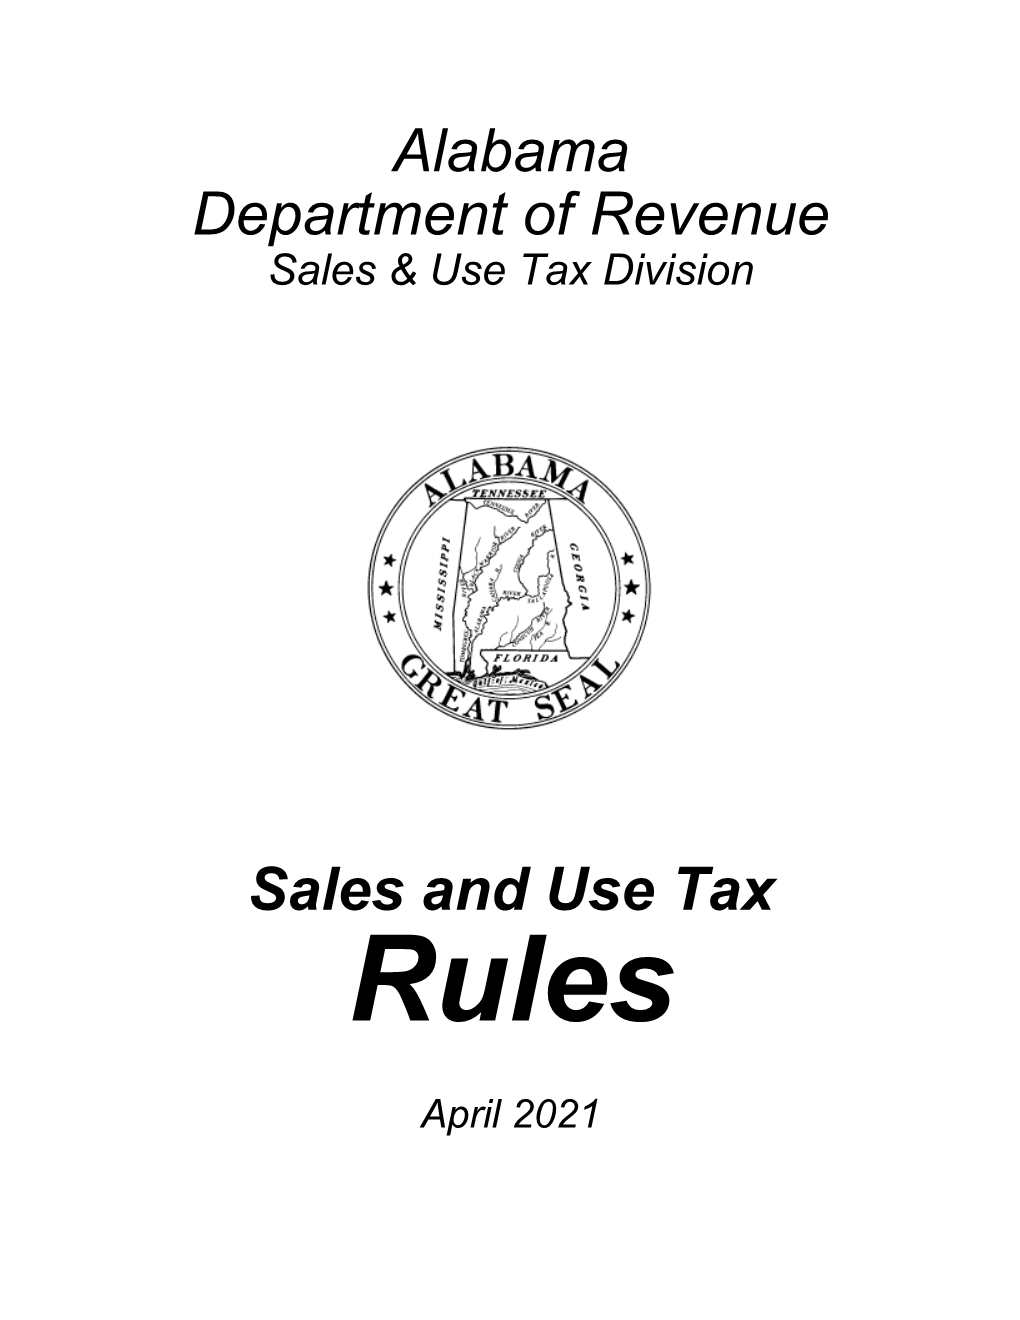 Sales and Use Tax Rules